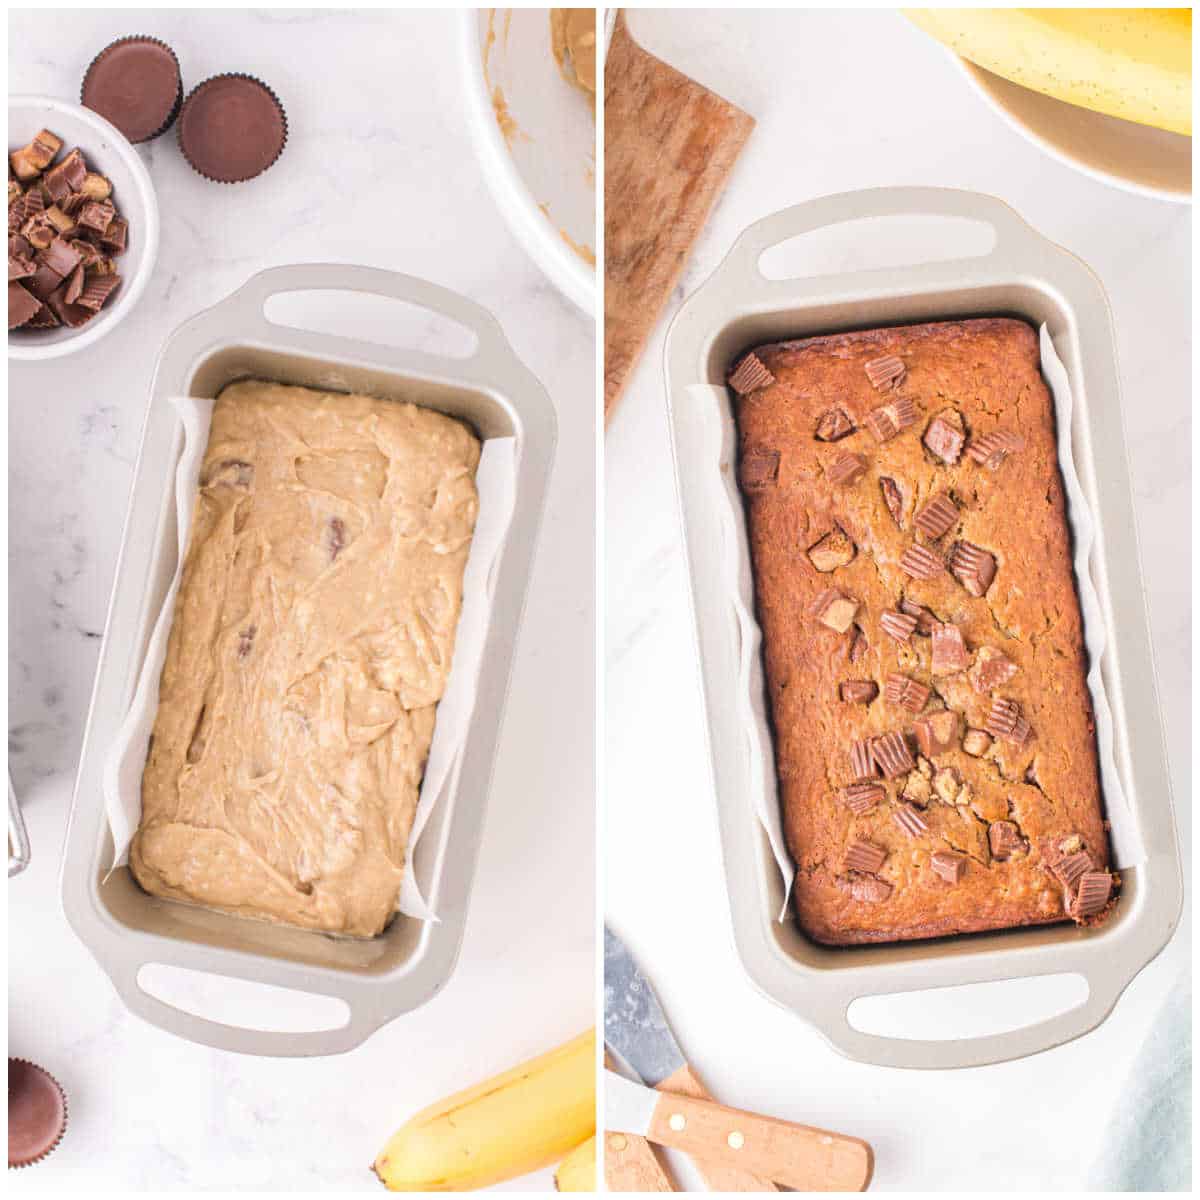 Steps to make Reese's Peanut Butter Banana Bread.